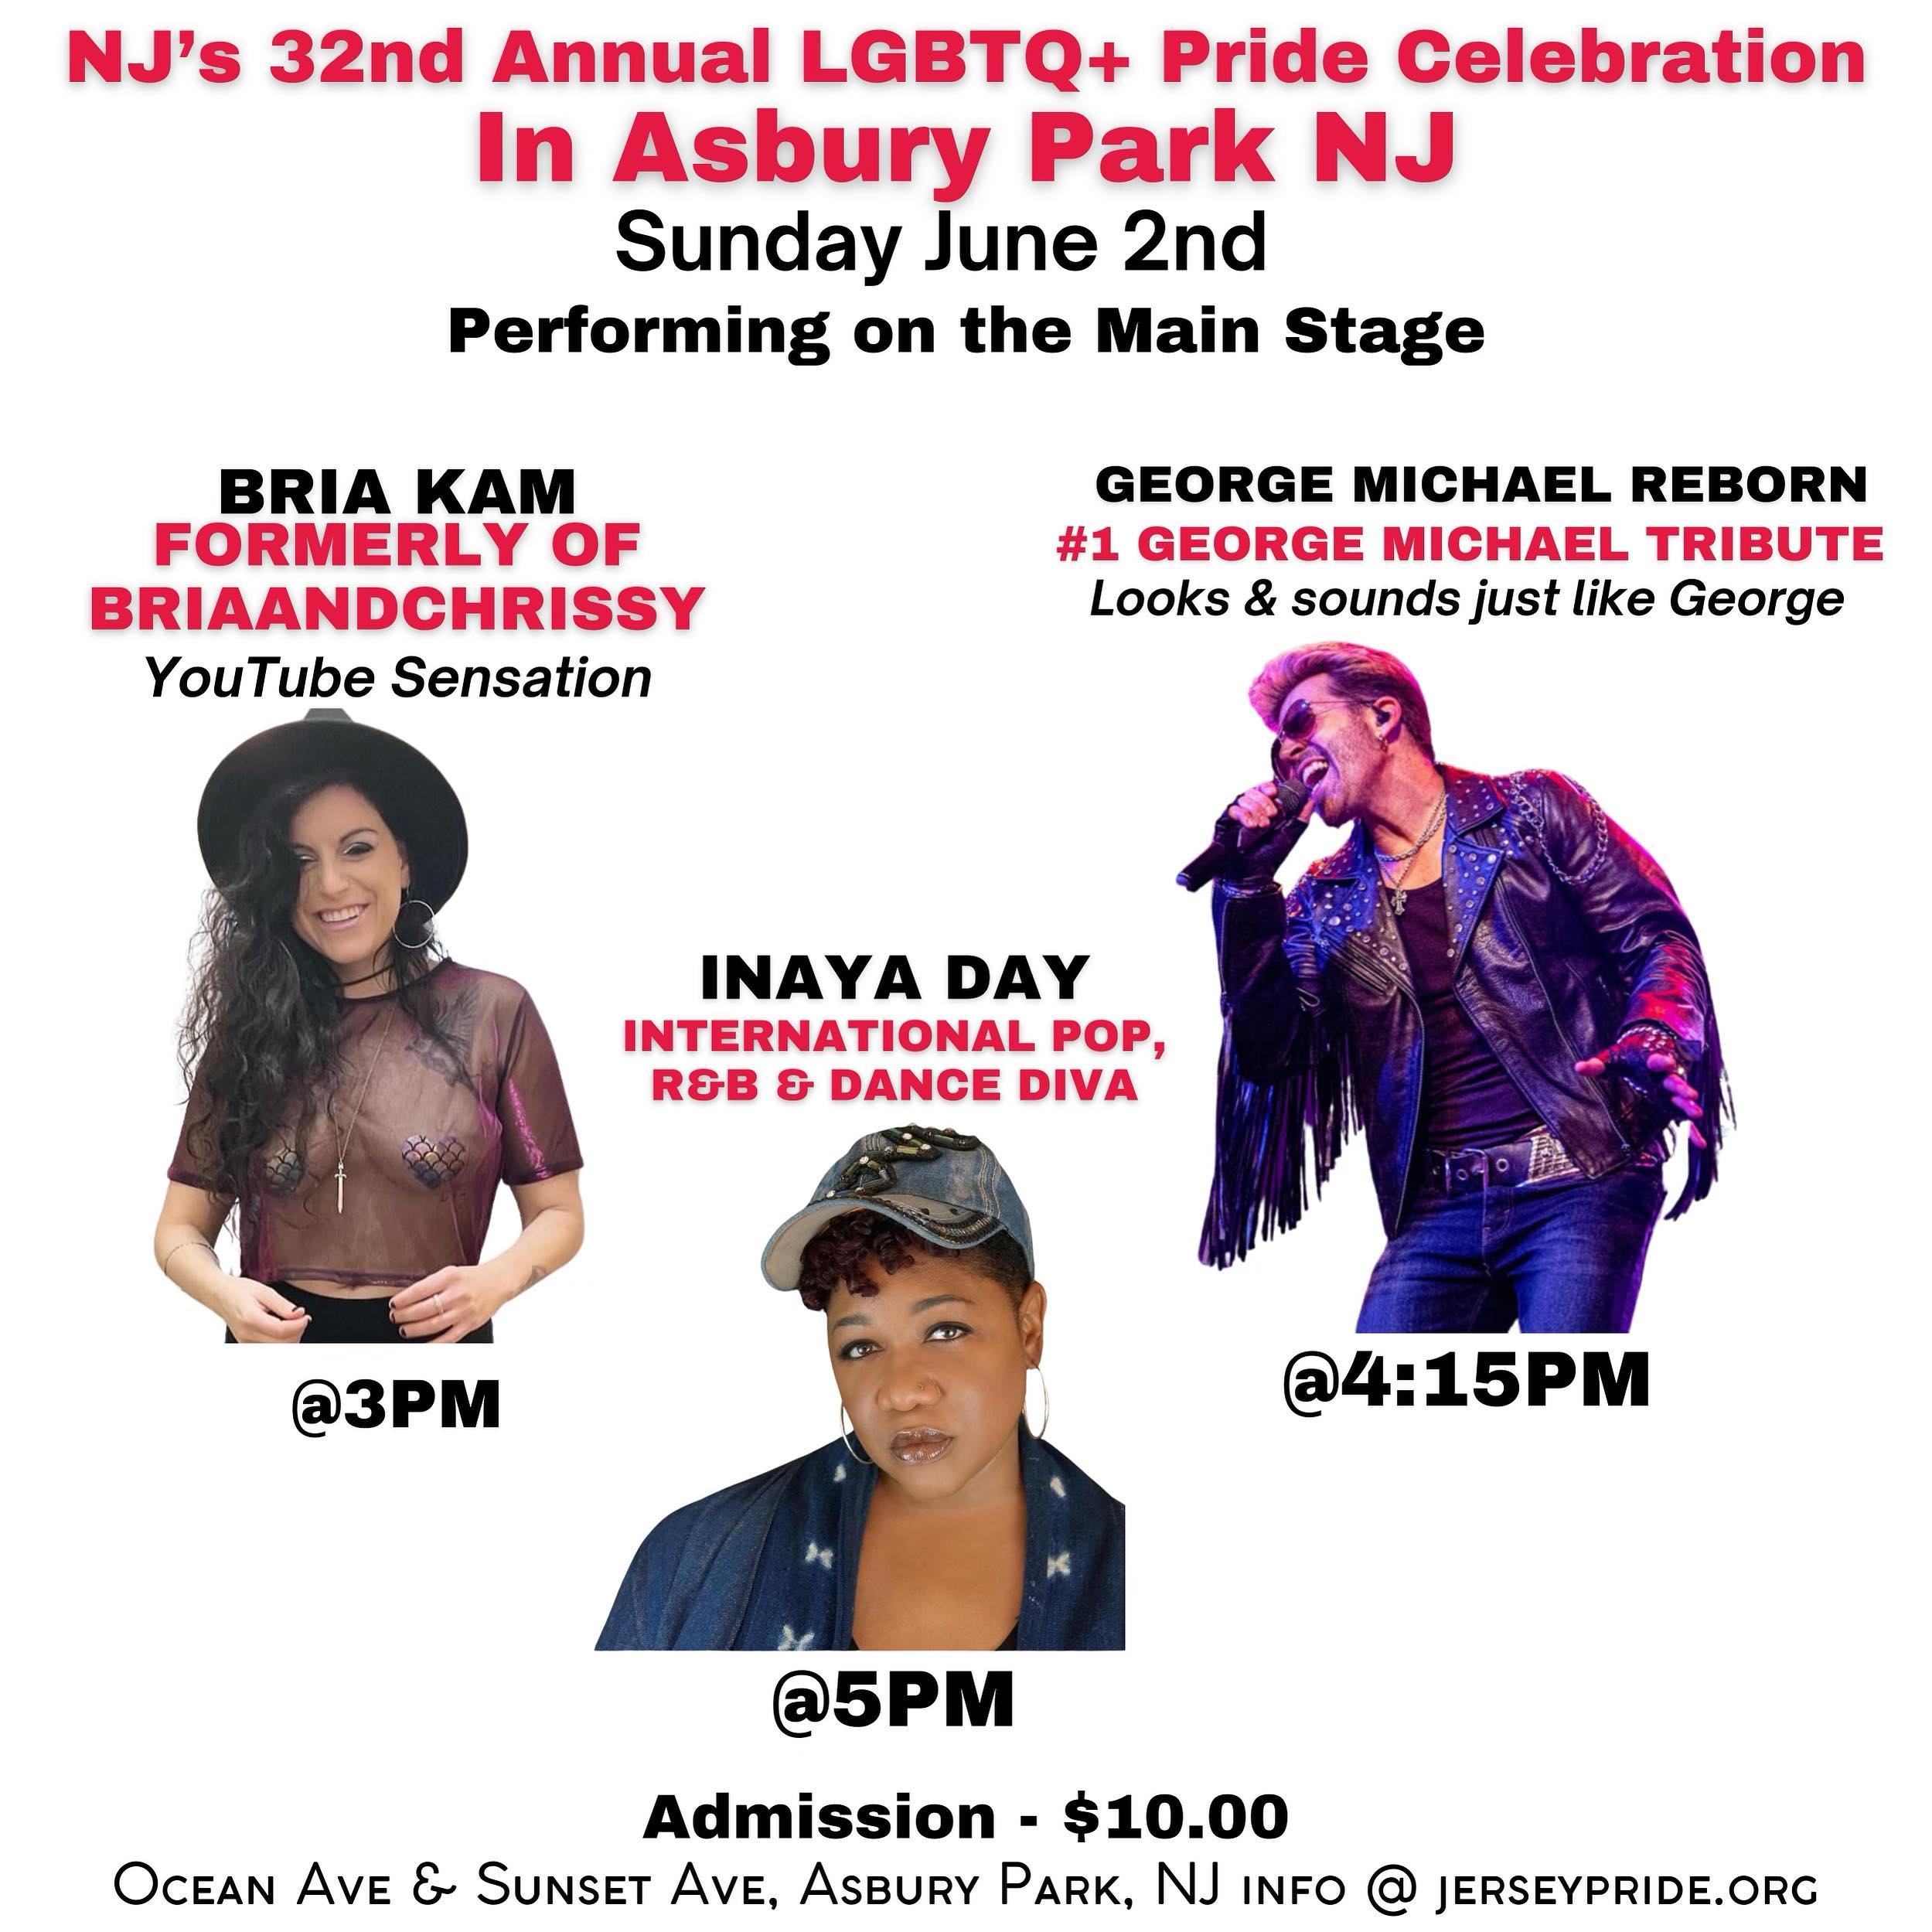 Guess who’s one of the headliners for NEW JERSEYS pride festival this year!!!!!! June 2nd I will be performing a solo show. This is my first pride solo booking and I couldn’t be more excited and proud. (I performed Vancouver pride solo but it was originally a BriaandChrissy booking) It’s amazing to know that festivals still want me as an act, that I’m enough. I’m emotional and excited. I HOPE I SEE YOU THERE!!! 🎶 🎵 🌈🎤🎹🏳️‍🌈